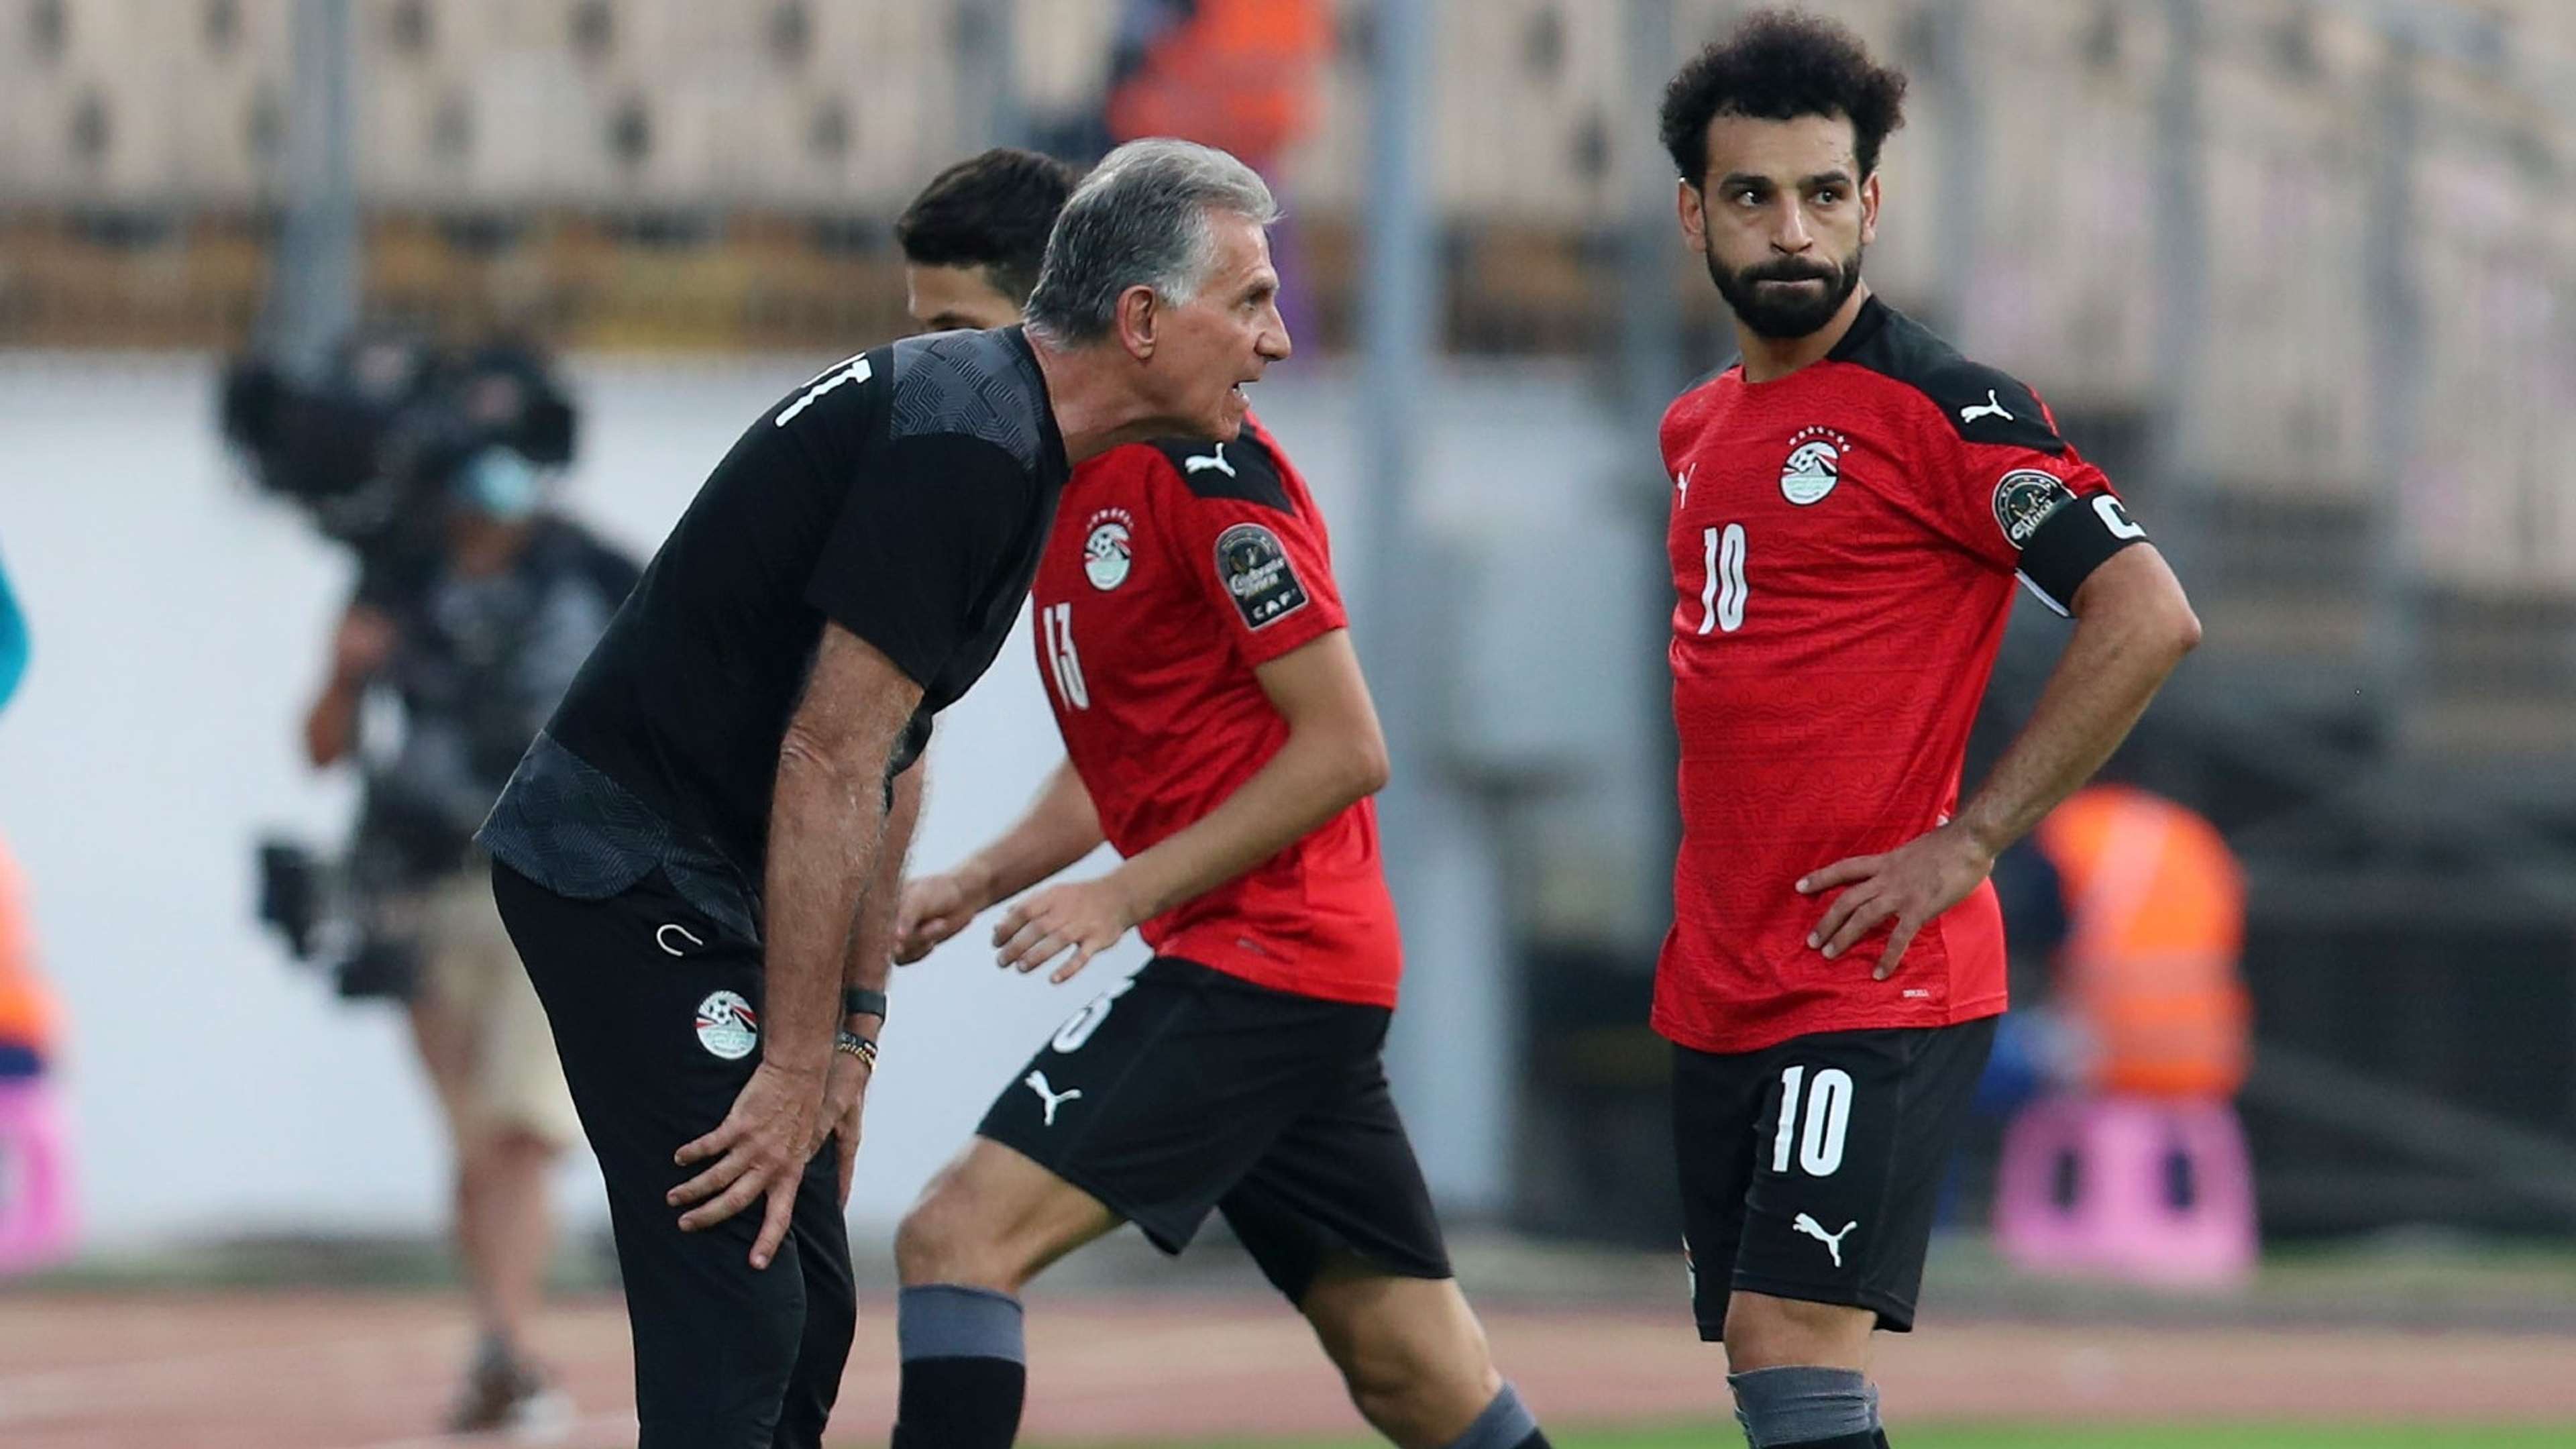 Carlos Queiroz, coach of Egypt talking to Mohamed Salah of Egypt.